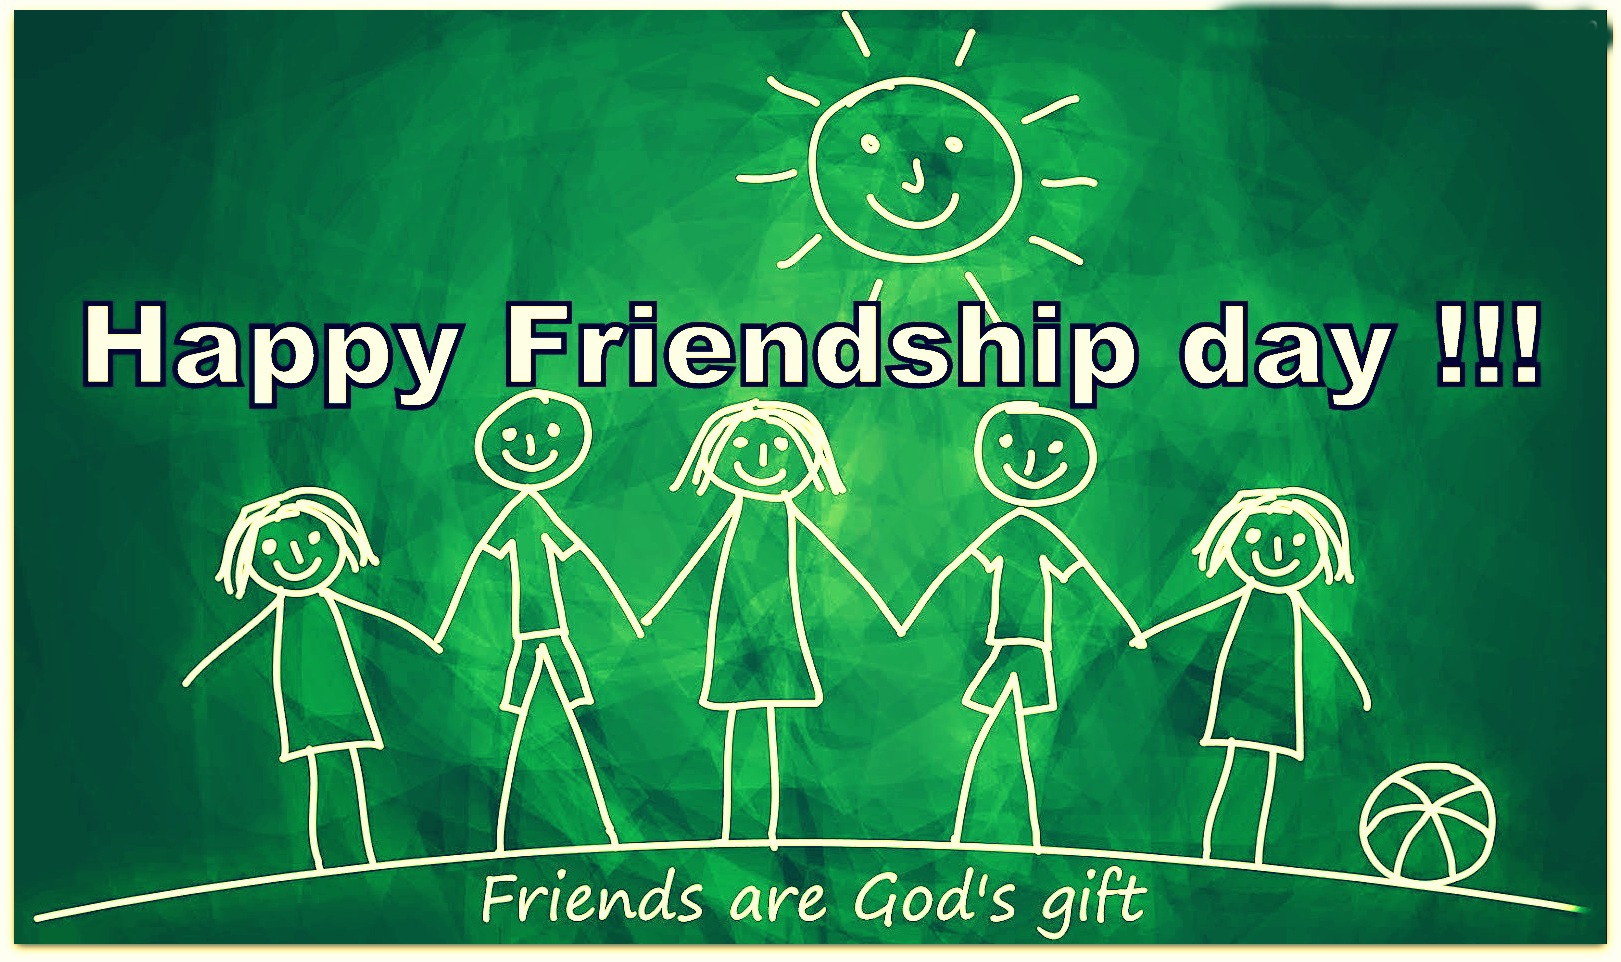 Happy Friendship Day Wishes Wallpapers Free Download